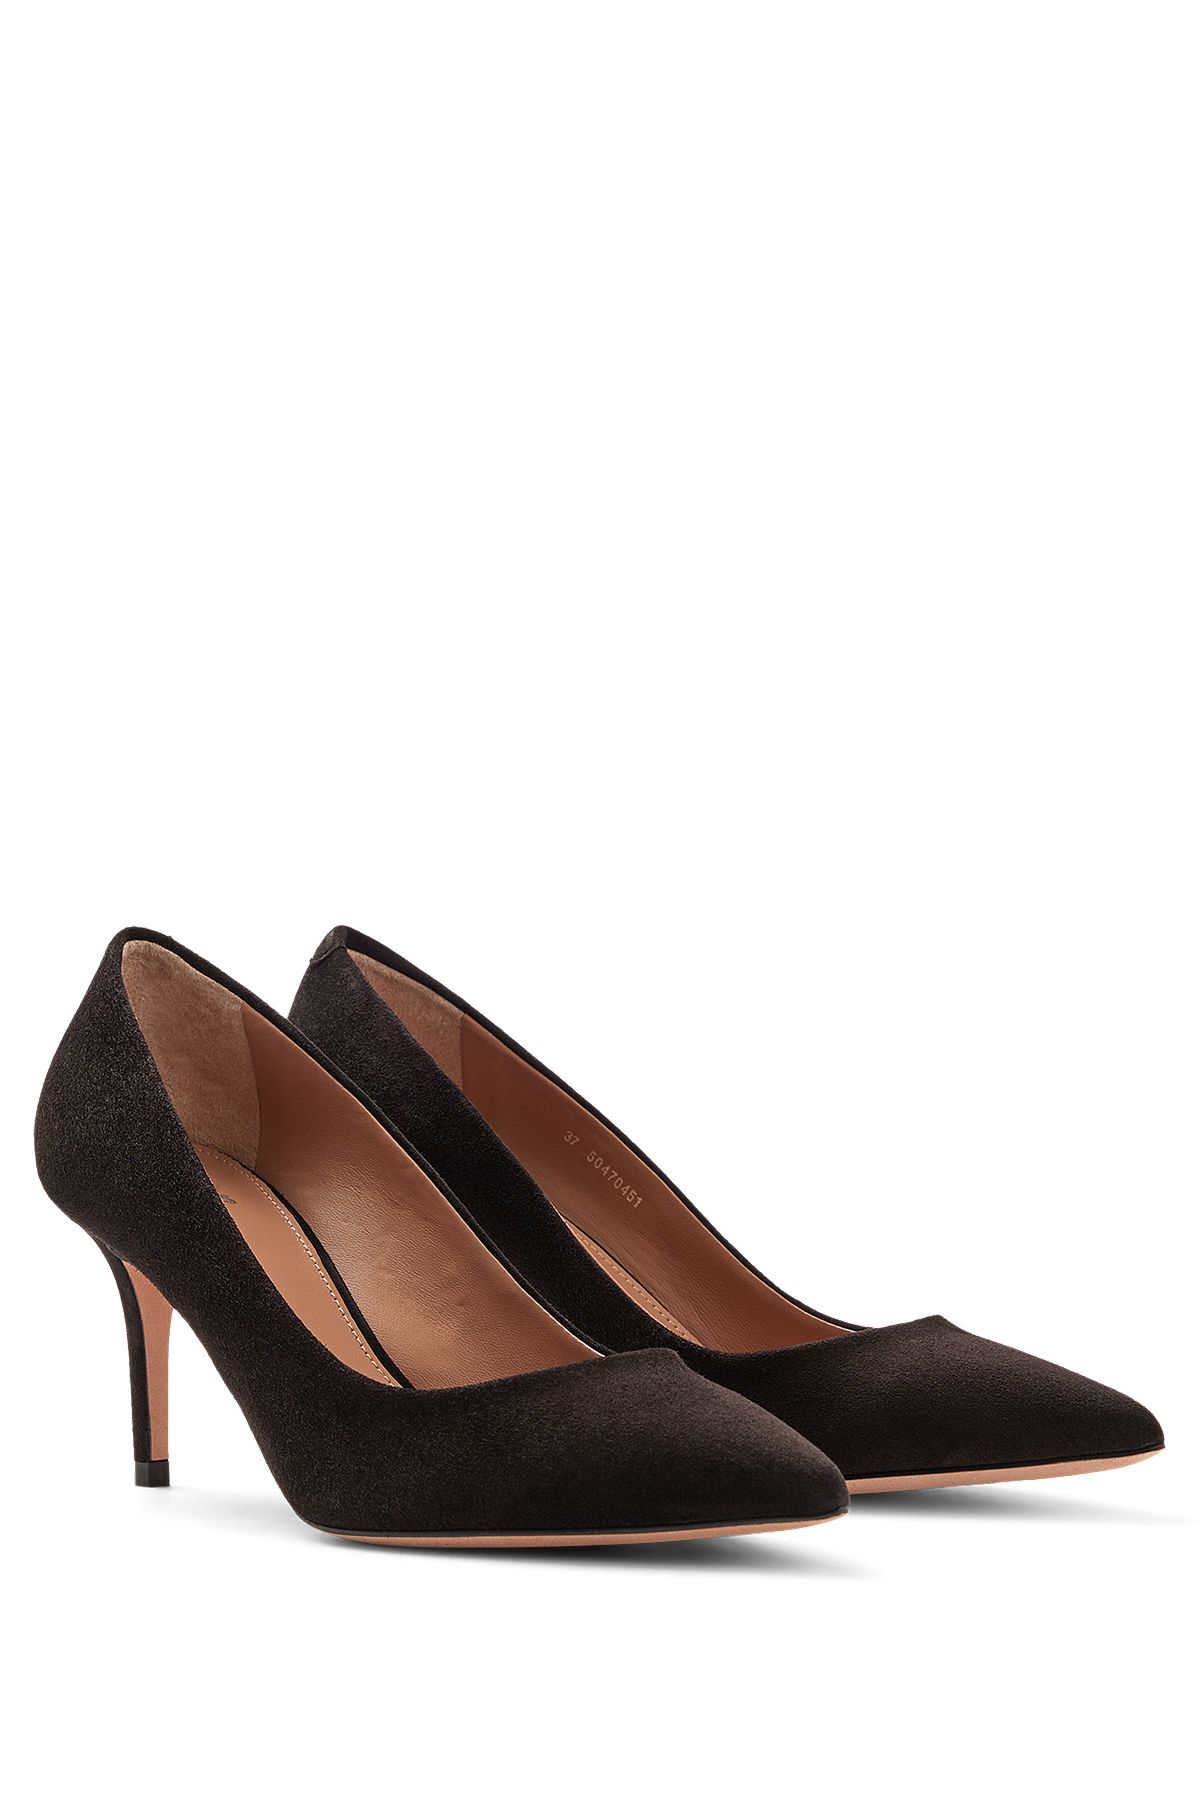 Italian-made suede pumps with pointed toe, Black